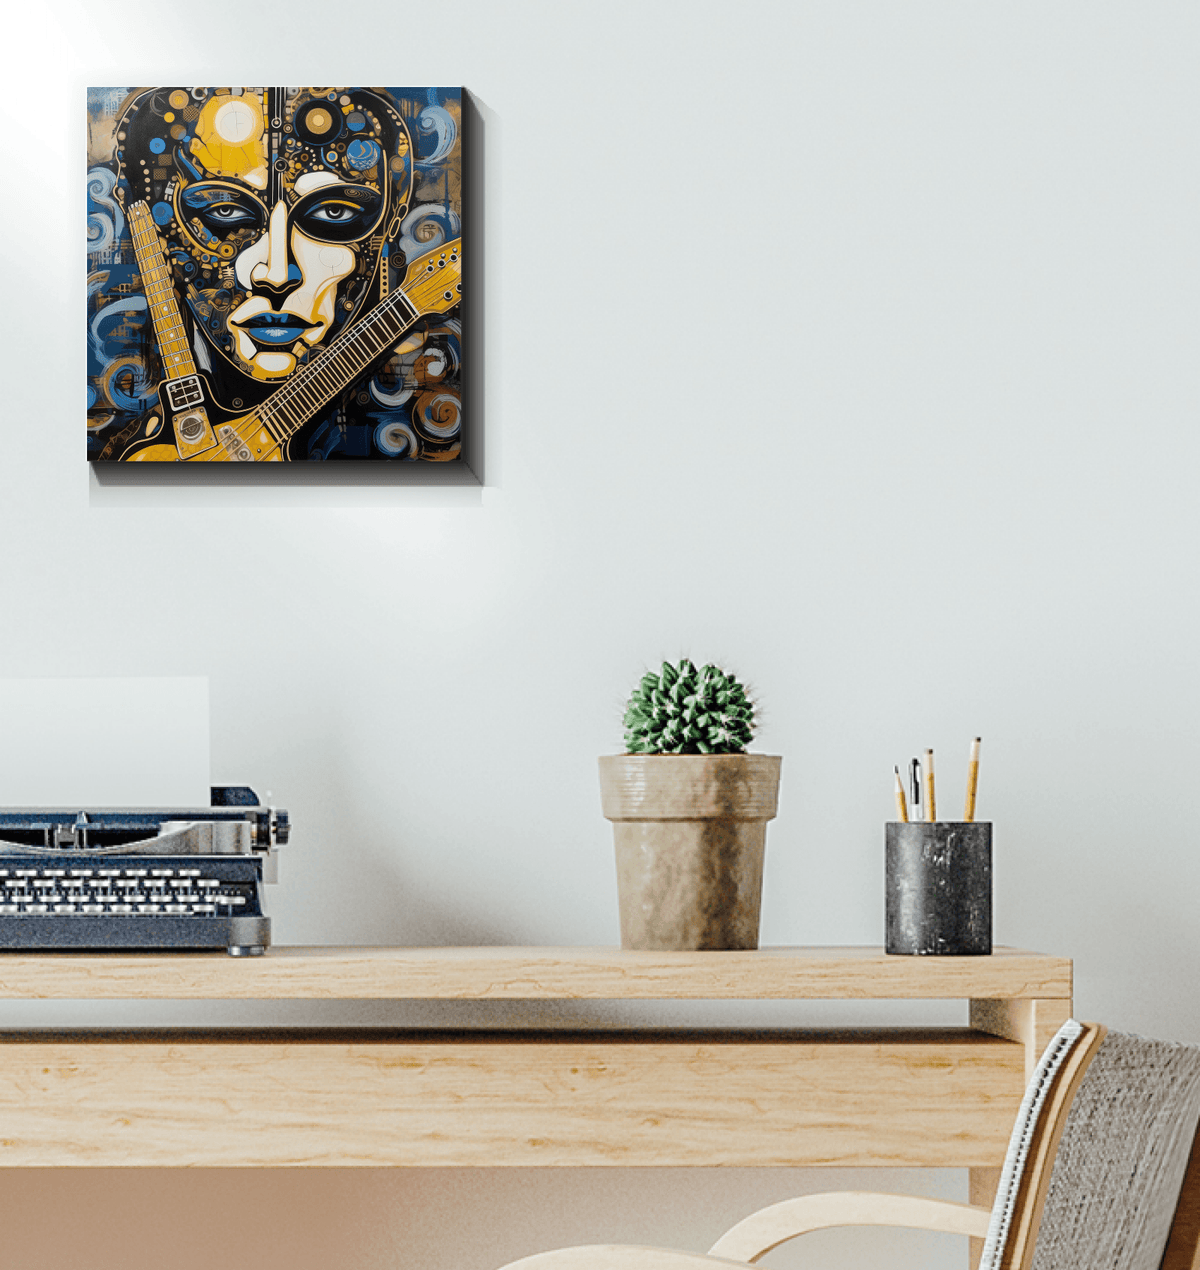 Home decor featuring musicians in abstract.